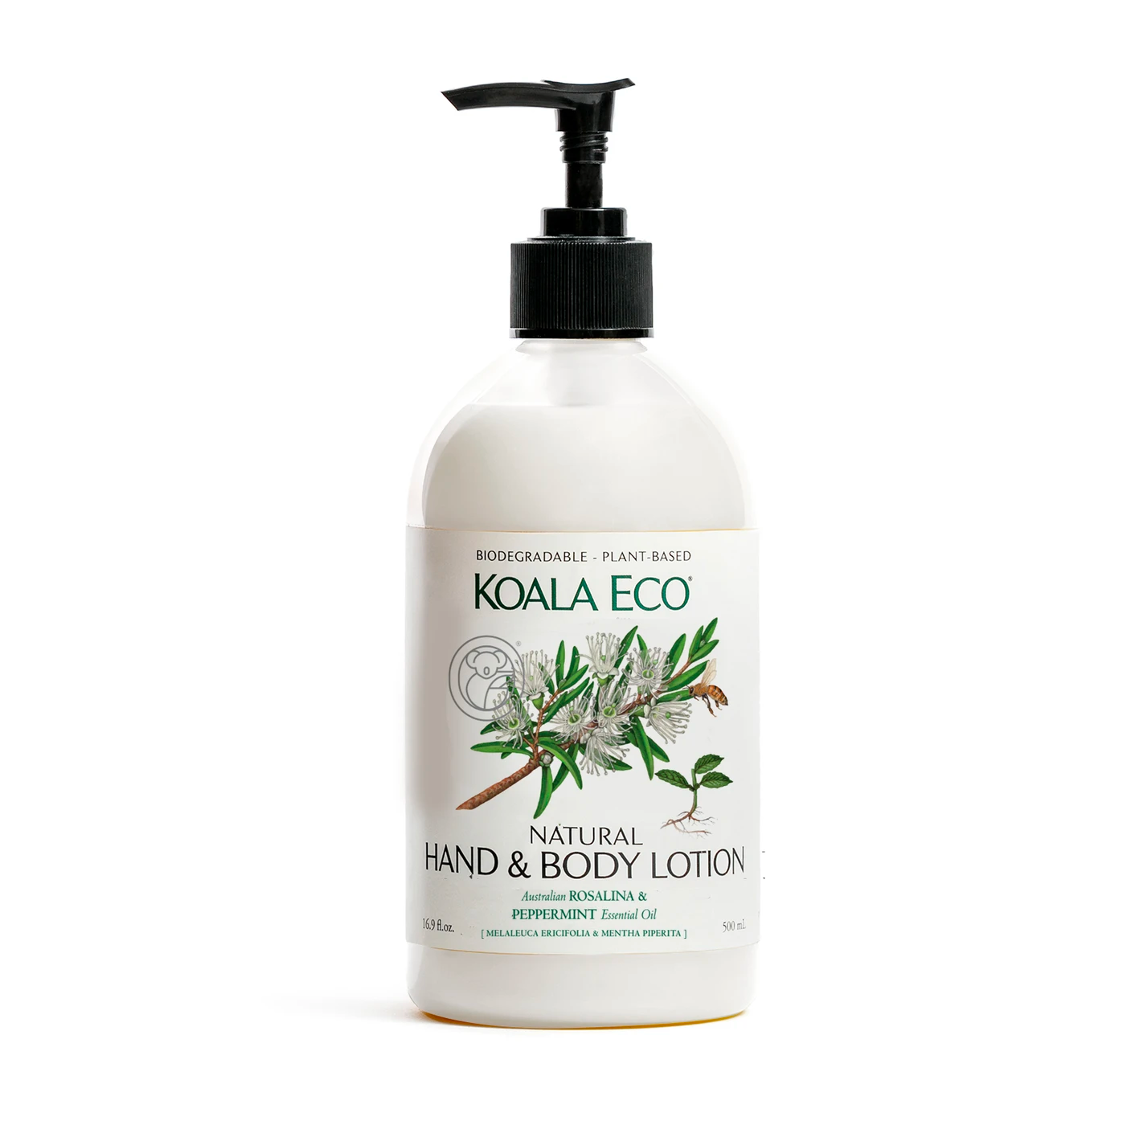 Hand and Body Lotion (Rosalina and Peppermint)